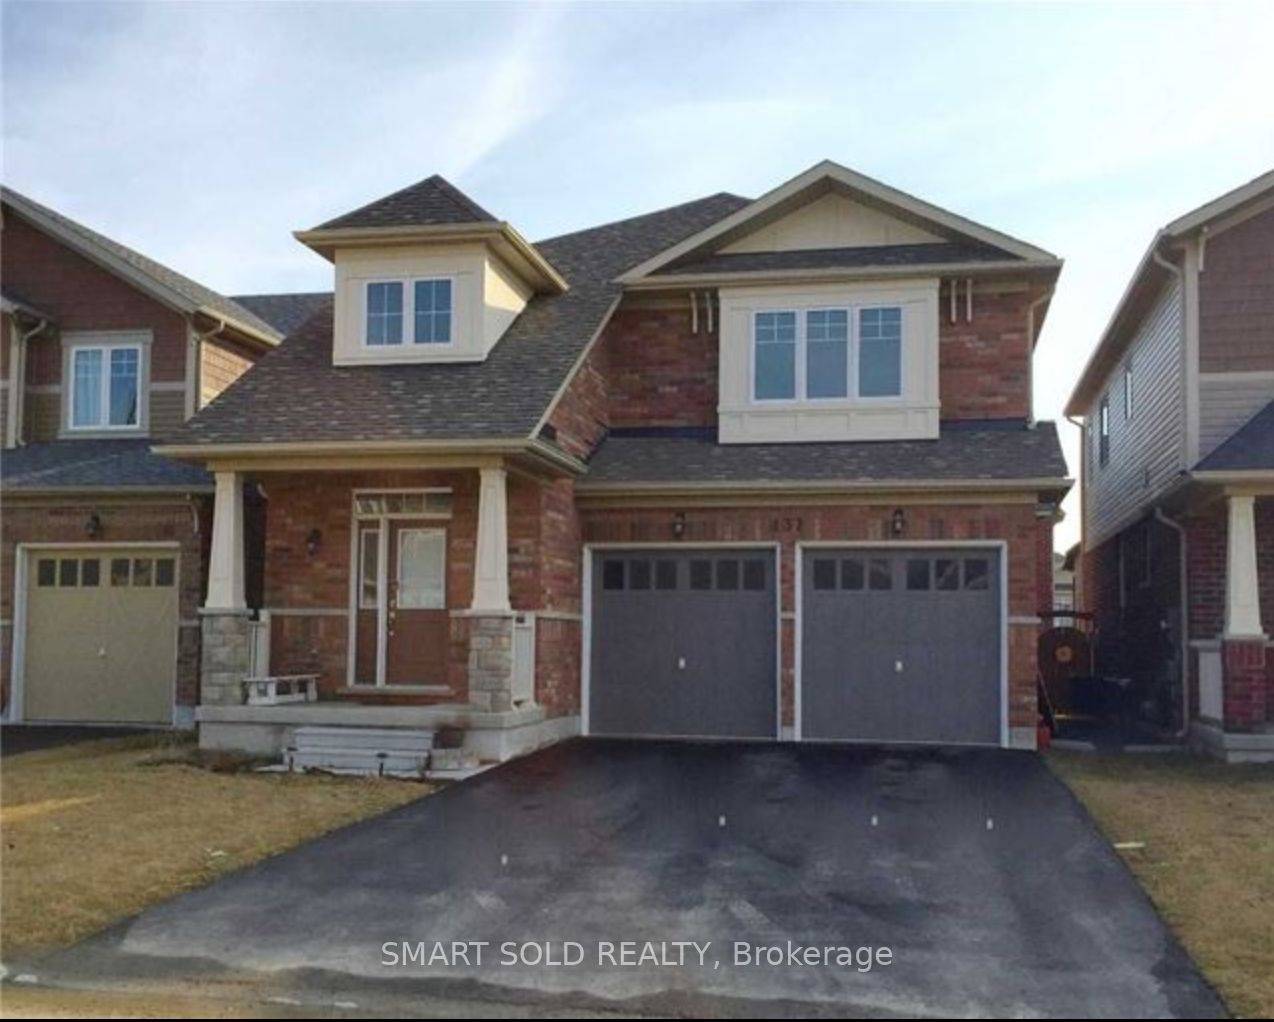 Beautiful Double Garage Detached House With 3 Bedrooms And 4 Washrooms Located In North Oshawa's Popular Neighborhood.